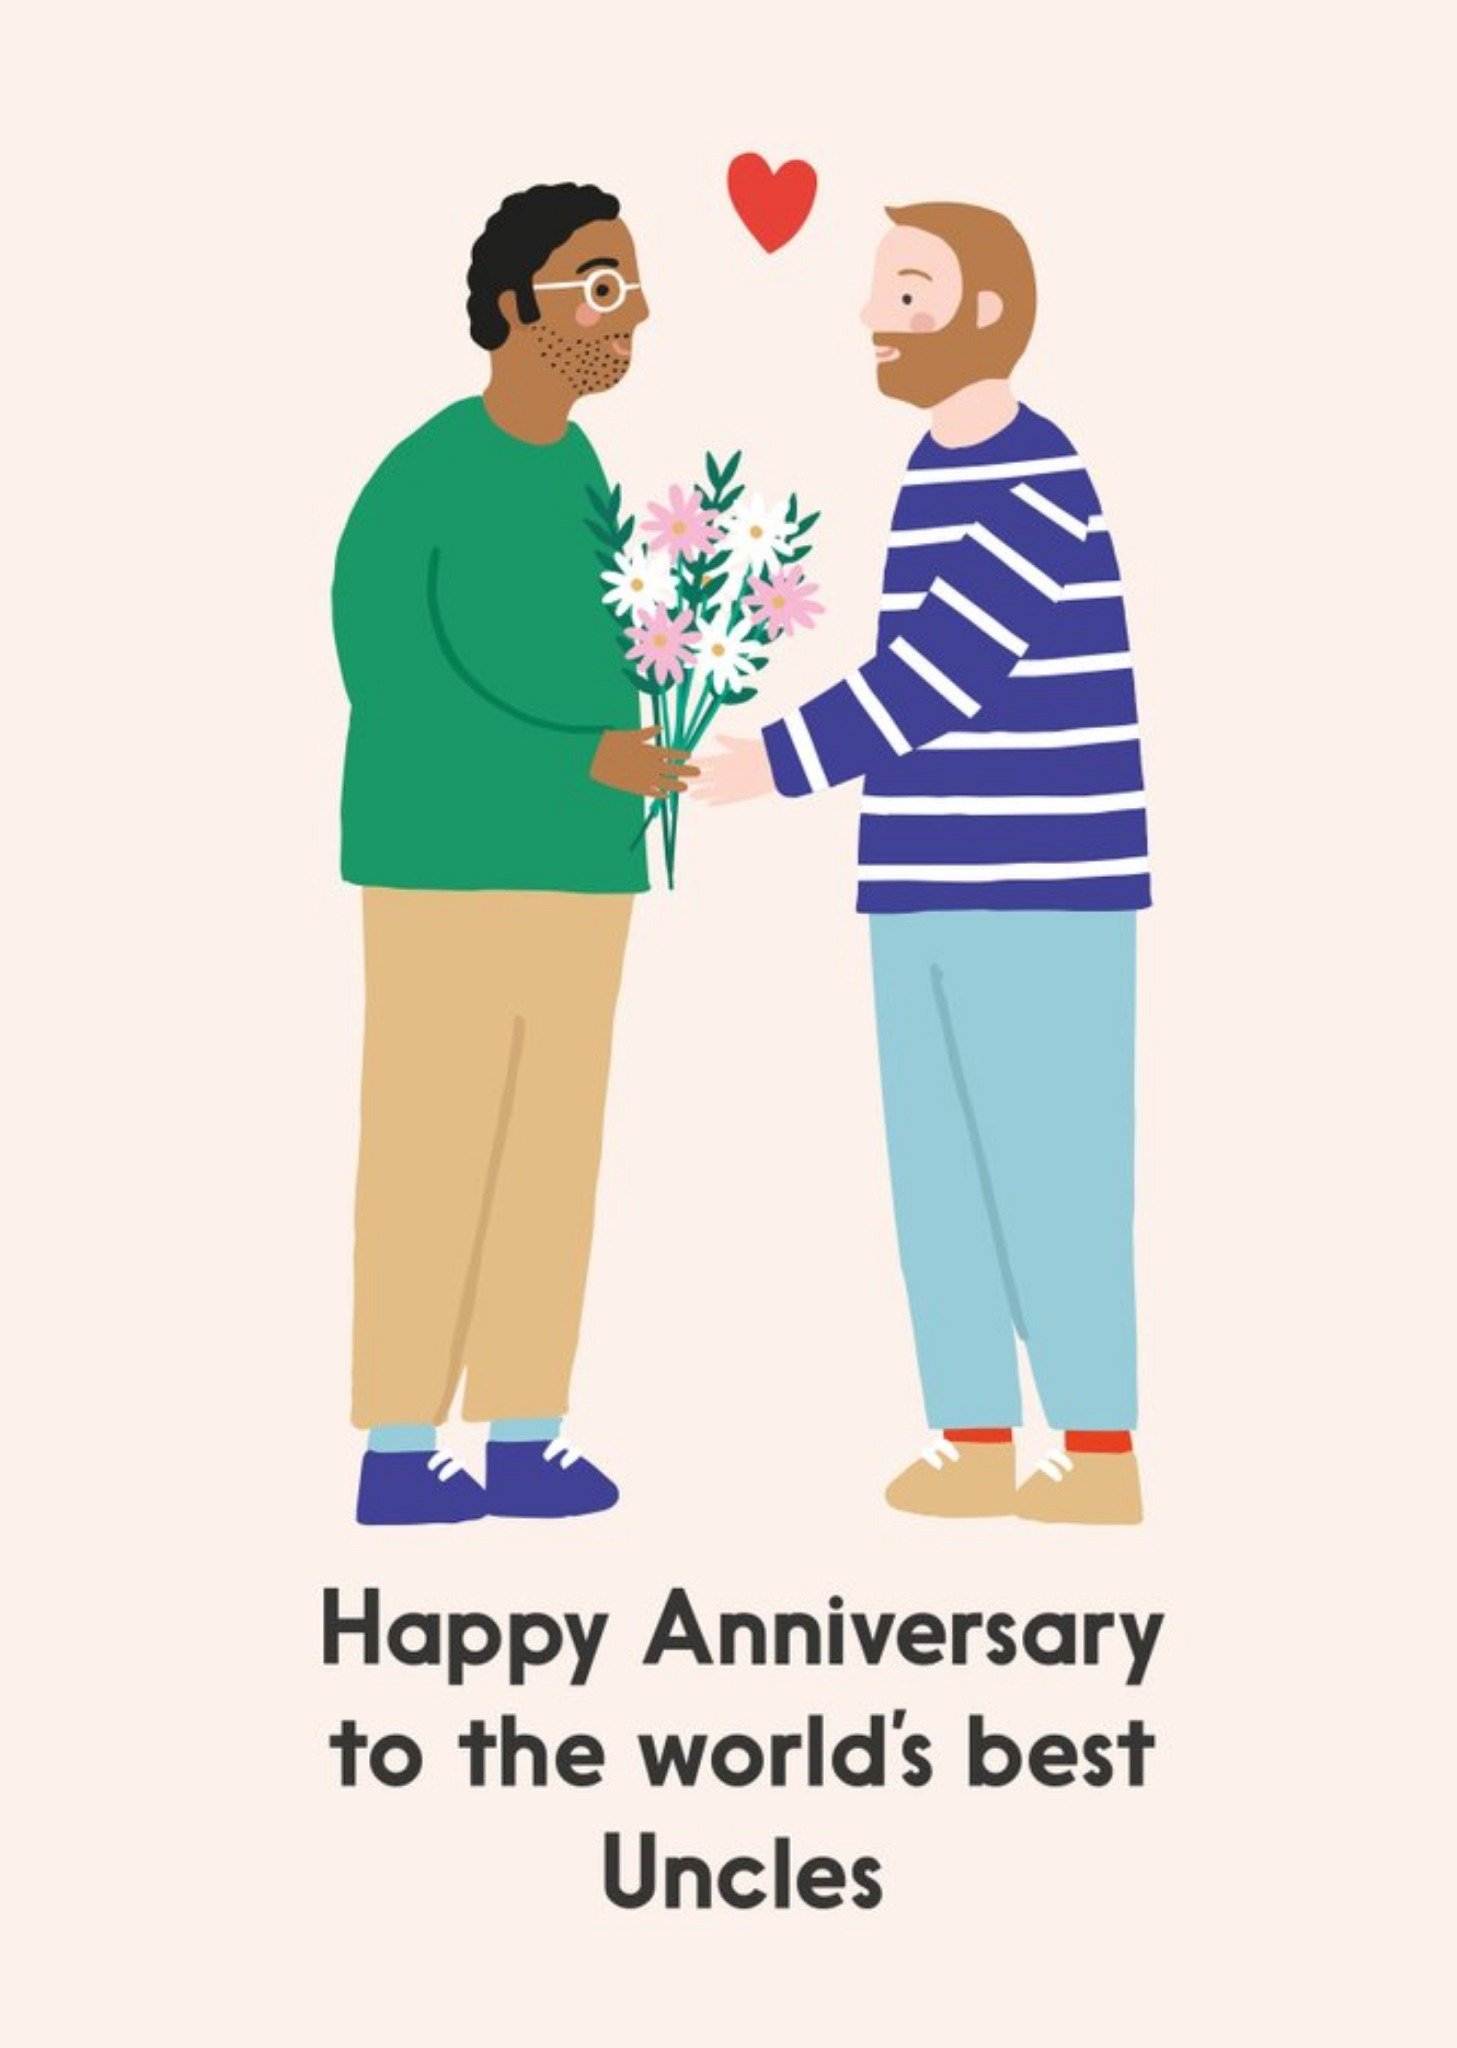 Moonpig Illustration Of A Couple Sharing Flowers World's Best Uncles Anniversary Card, Large